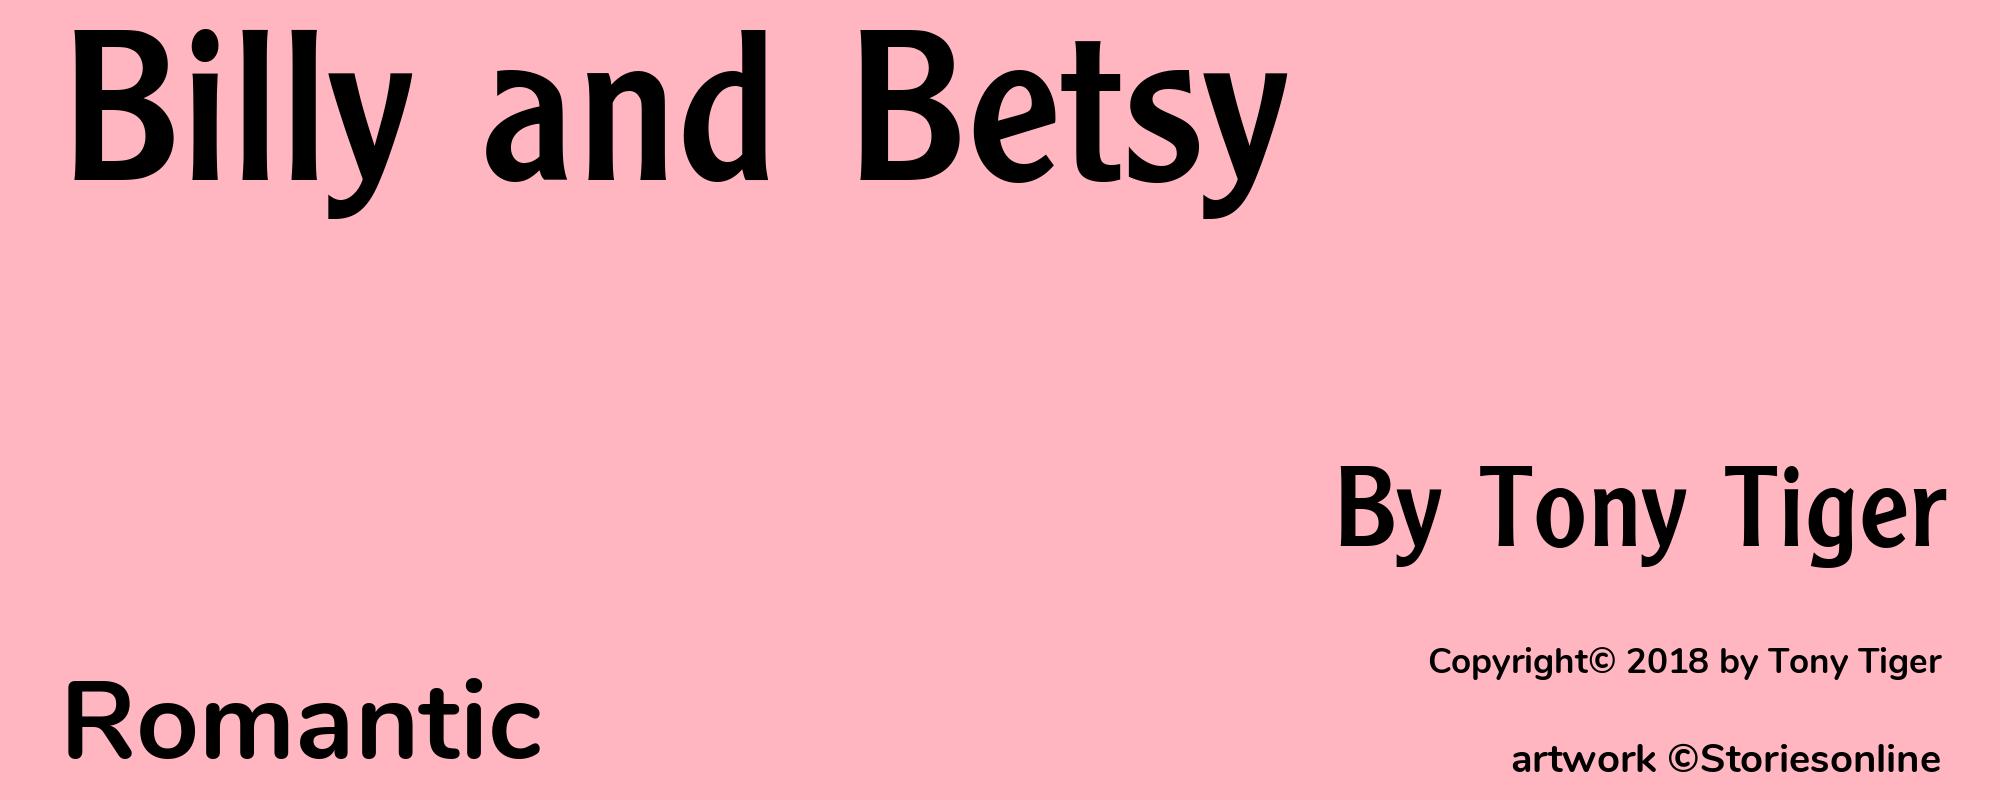 Billy and Betsy - Cover